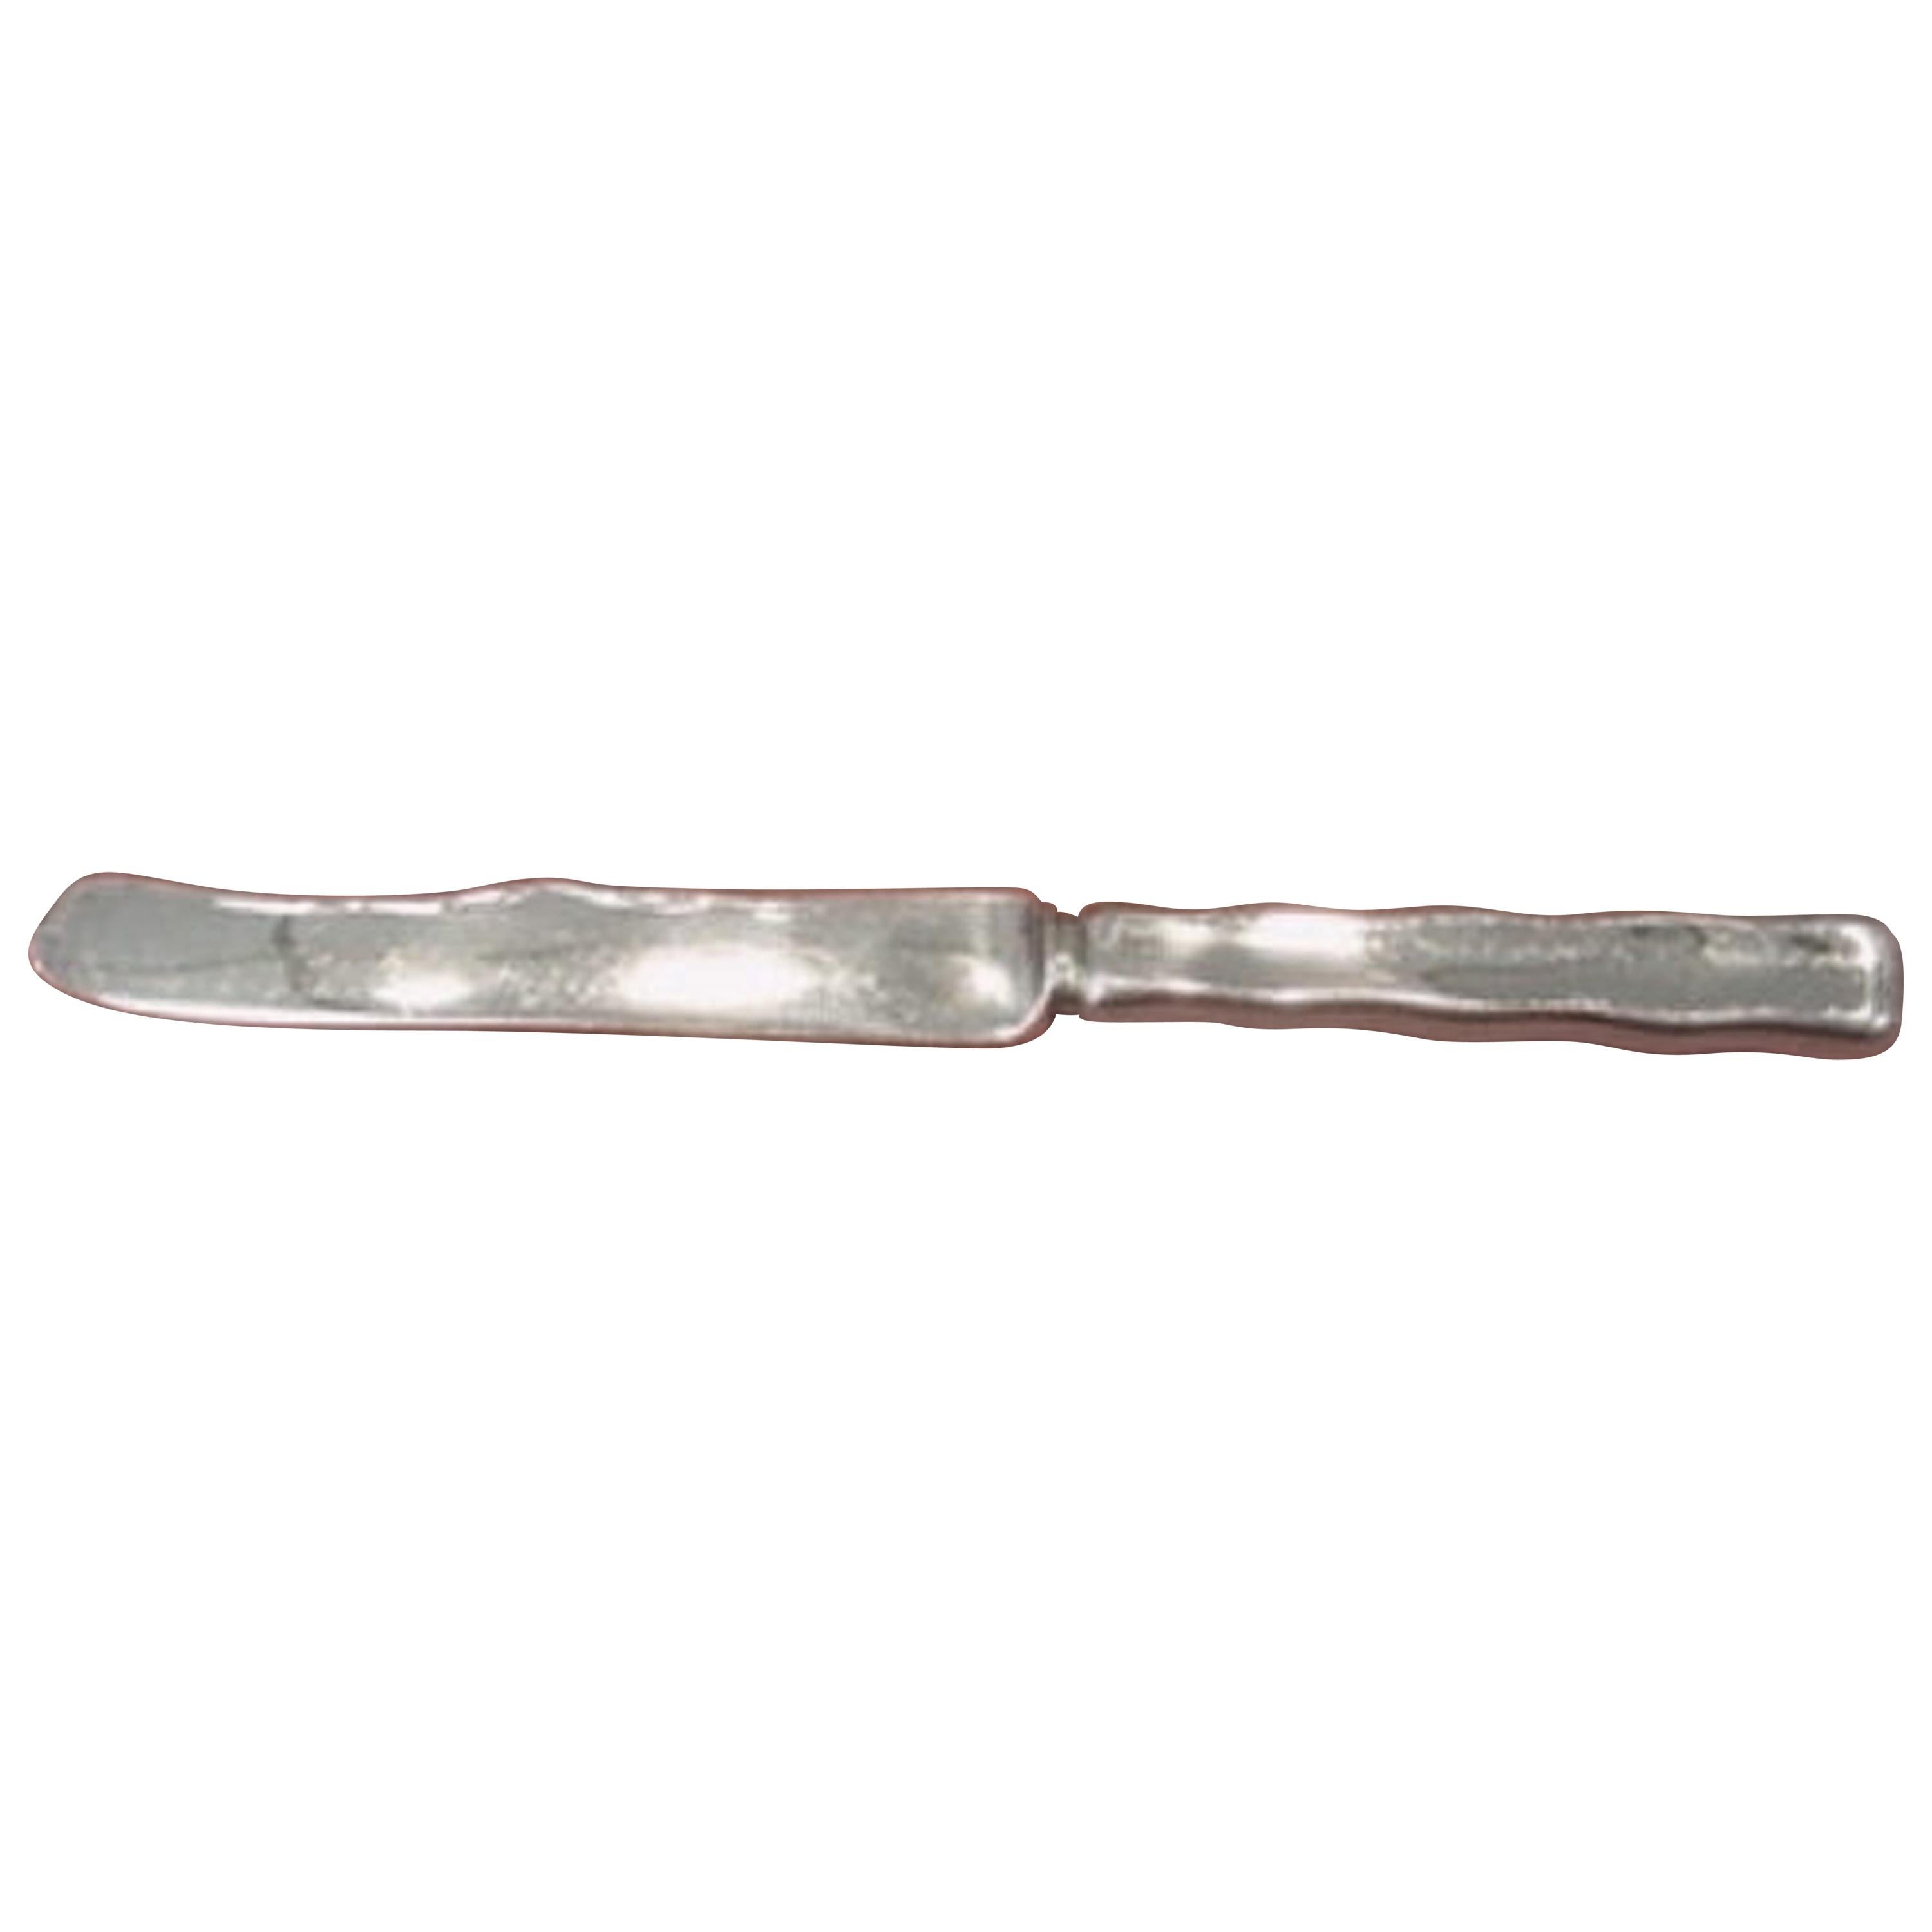 Lap Over Edge Plain by Tiffany & Co. Sterling Silver Tea Knife Wavy